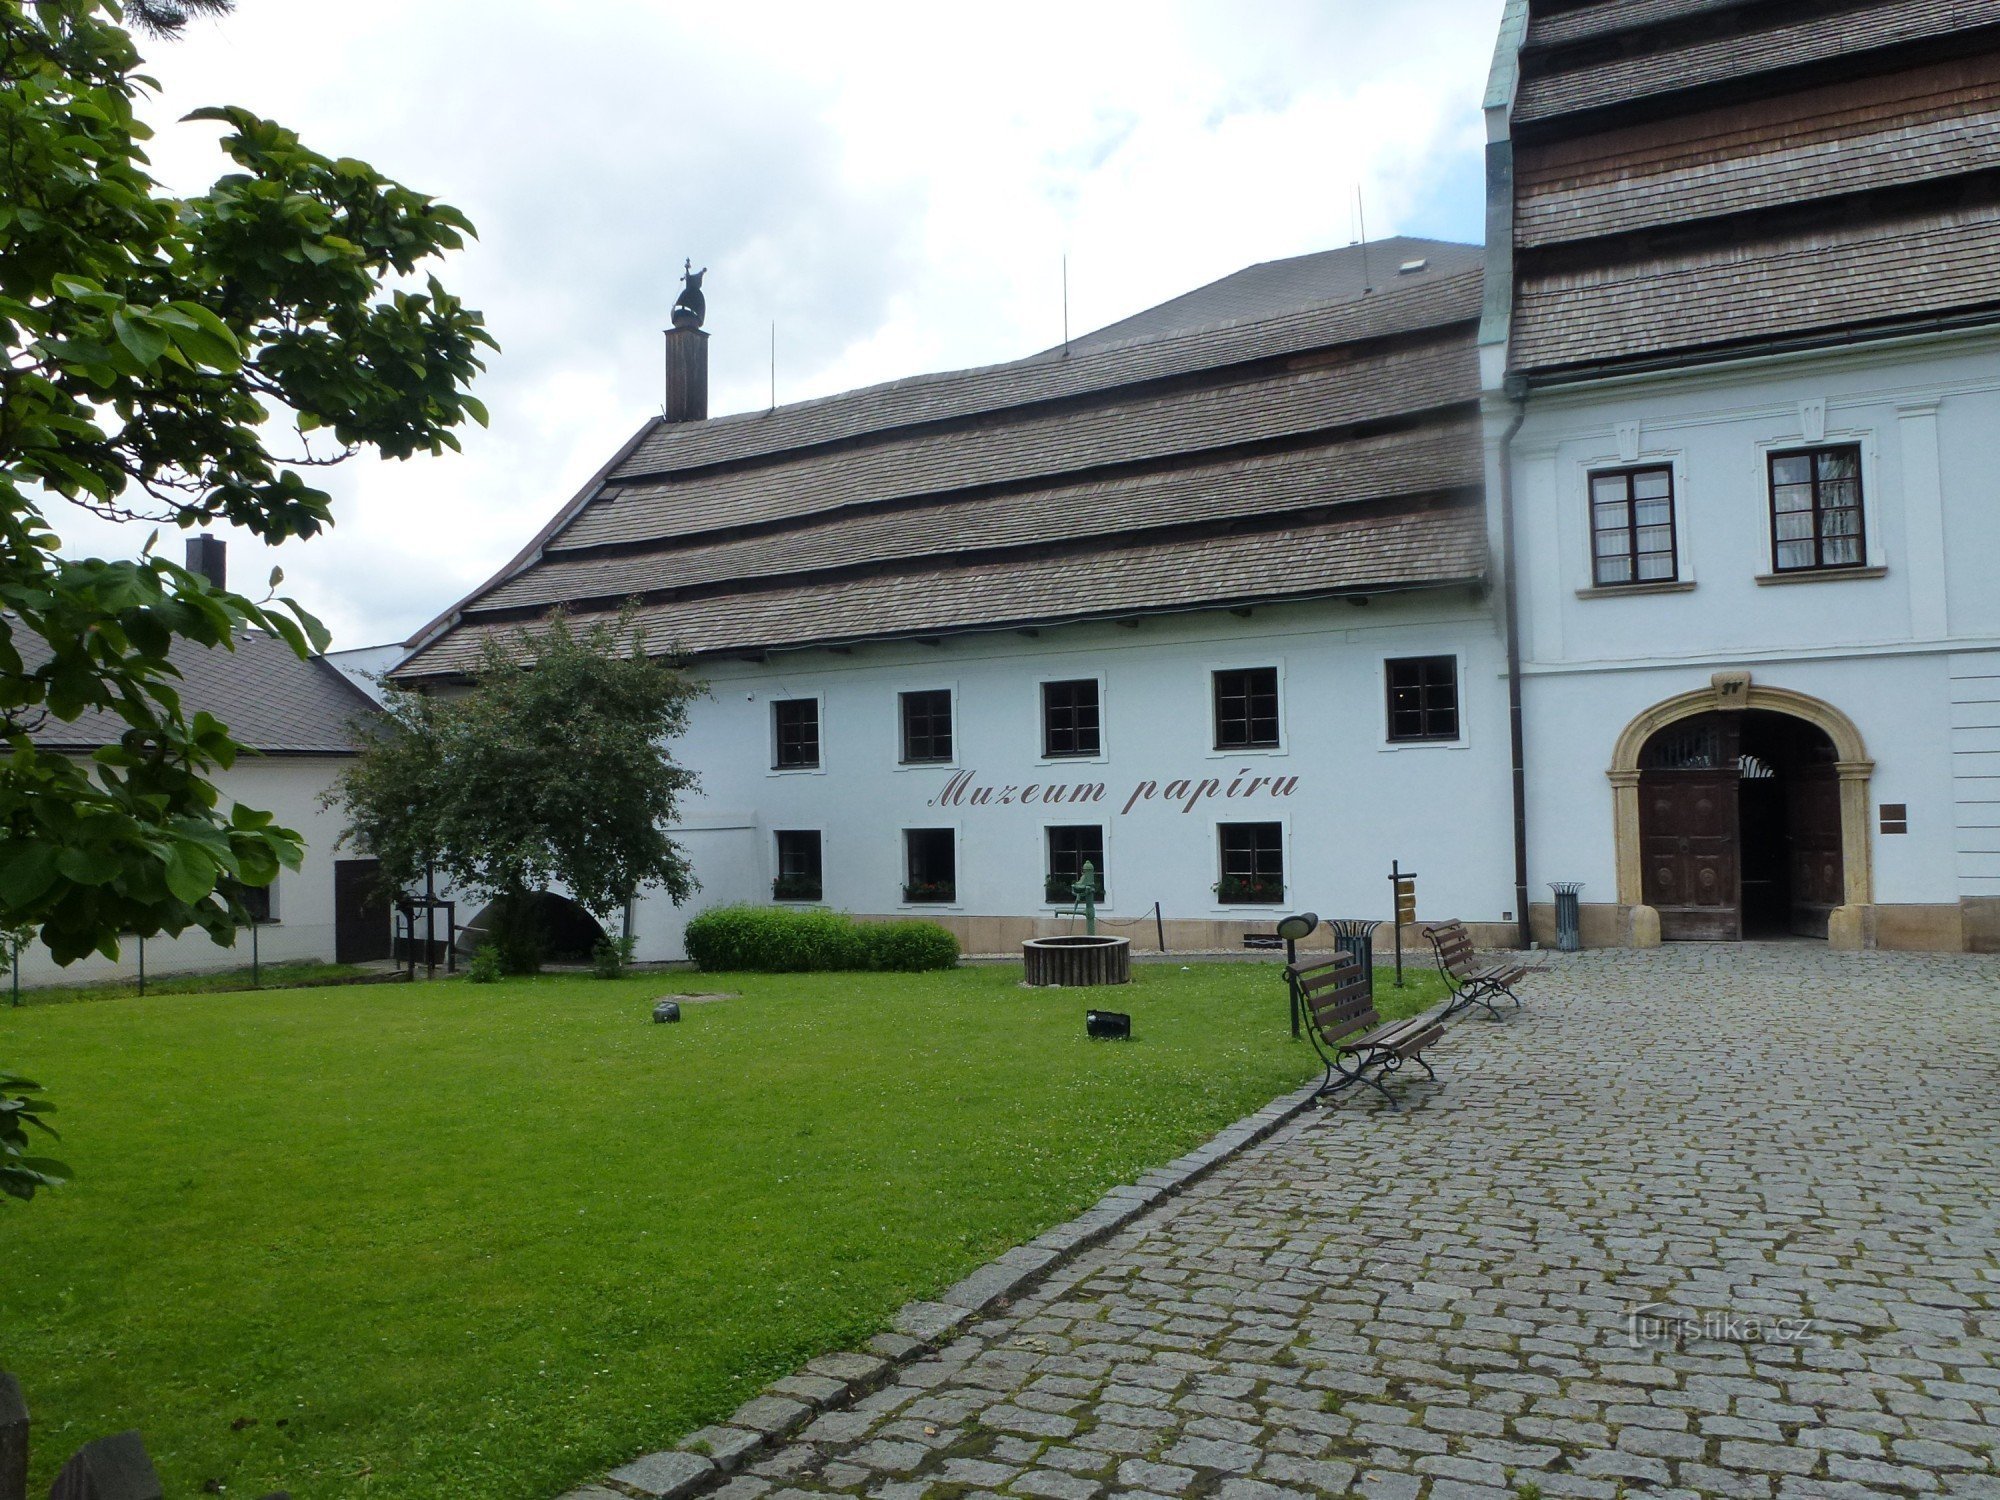 The unique paper mill also survived the witch trials of Velká Losina